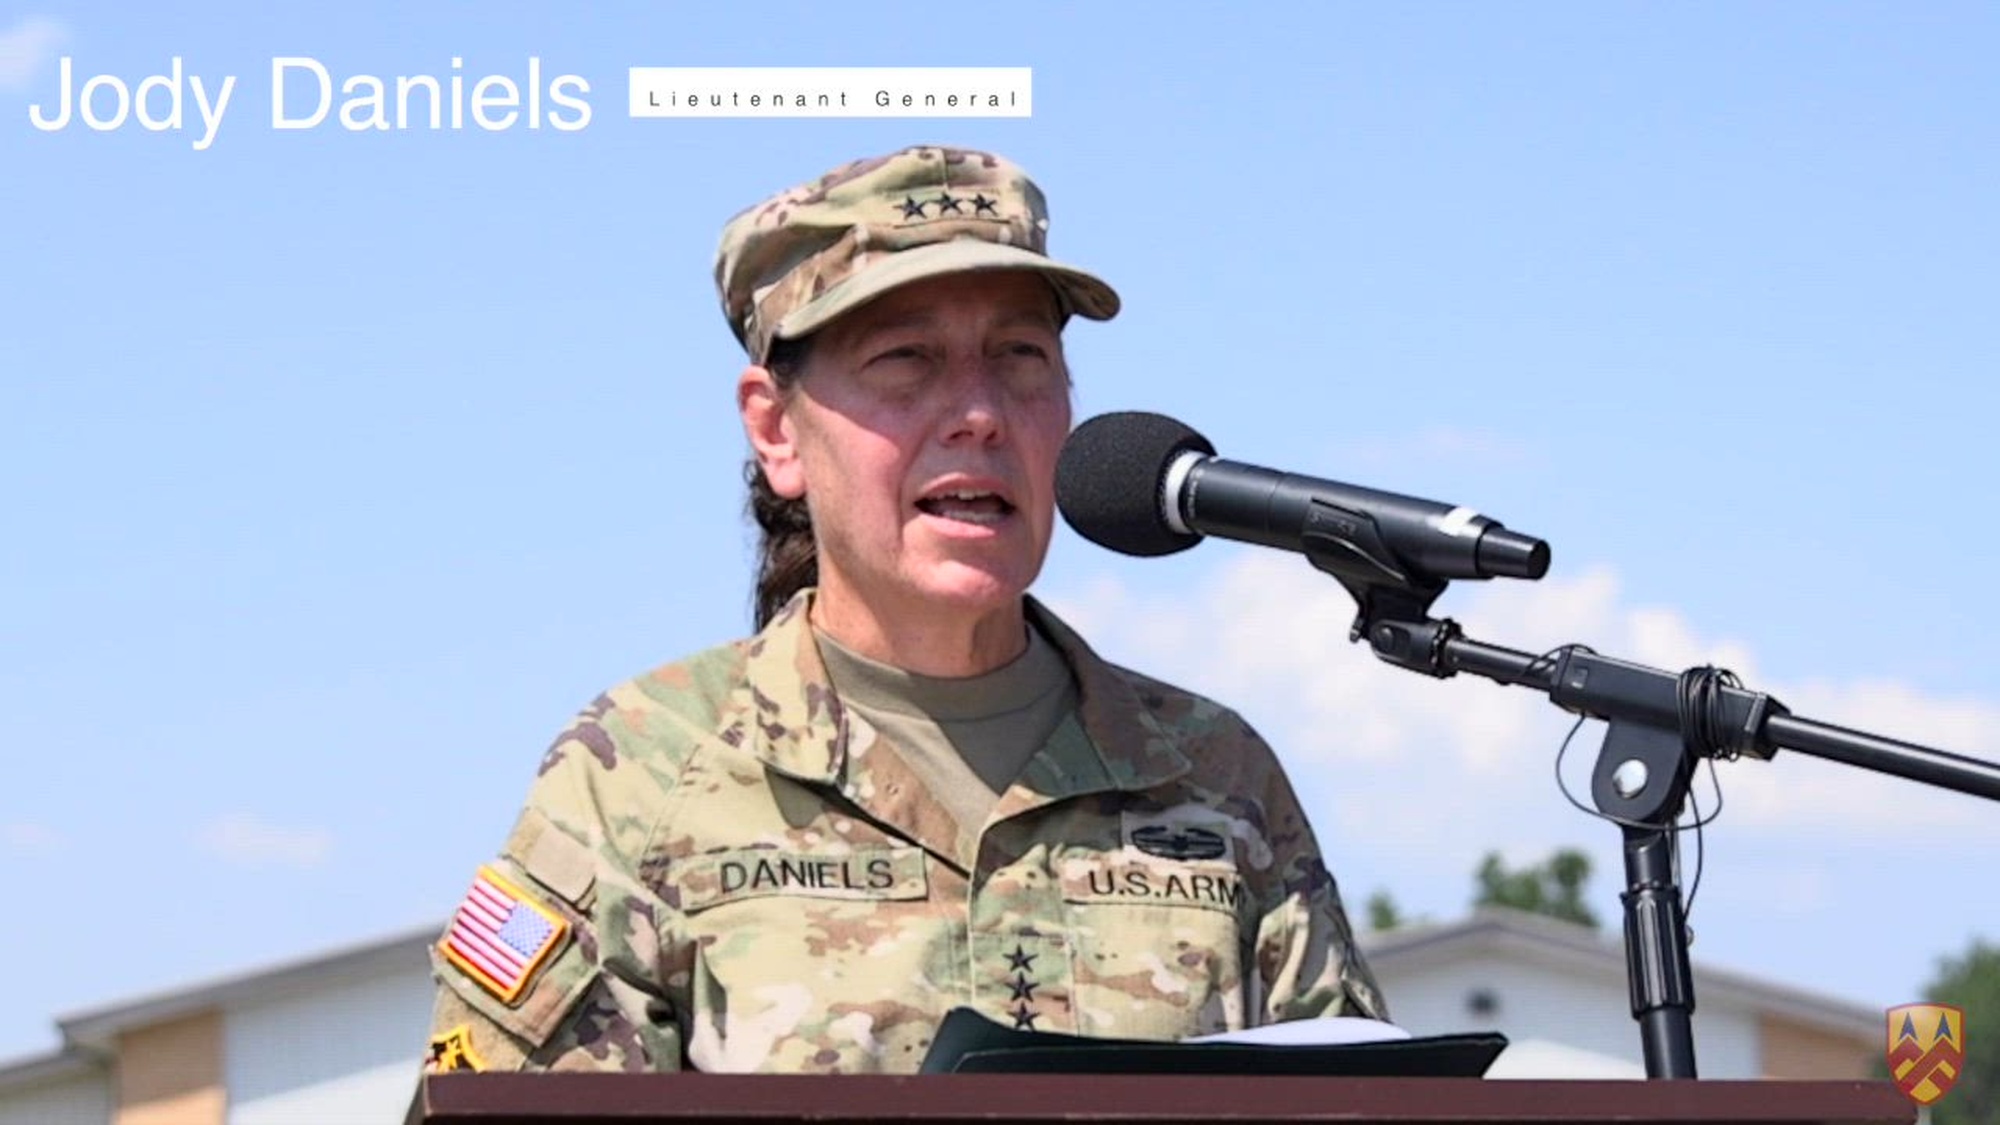 The U.S. Army Reserve Command Commanding General, Lt. Gen. Jody Daniels, praises the accomplishments of the 377th under its former commander, as Maj. Gen. Susan Henderson and 377th TSC Commanding General, Brig. Gen. Justin Swanson reflect on the team, leadership and Soldiers who make it all happen.